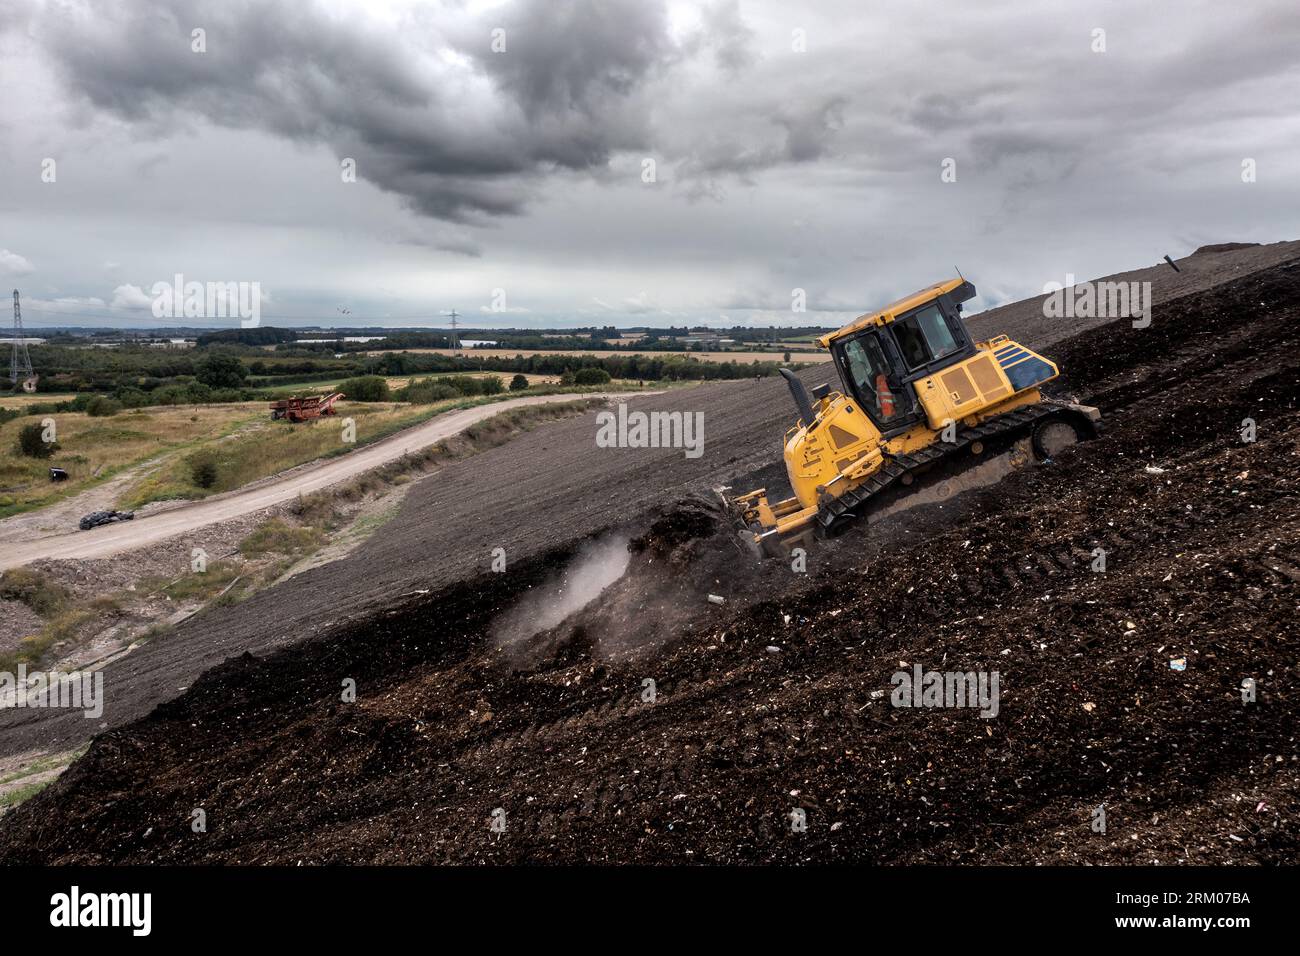 A bulldozer organising and moving shredded waste on the downhill slope of a large landfill site with copy space Stock Photo